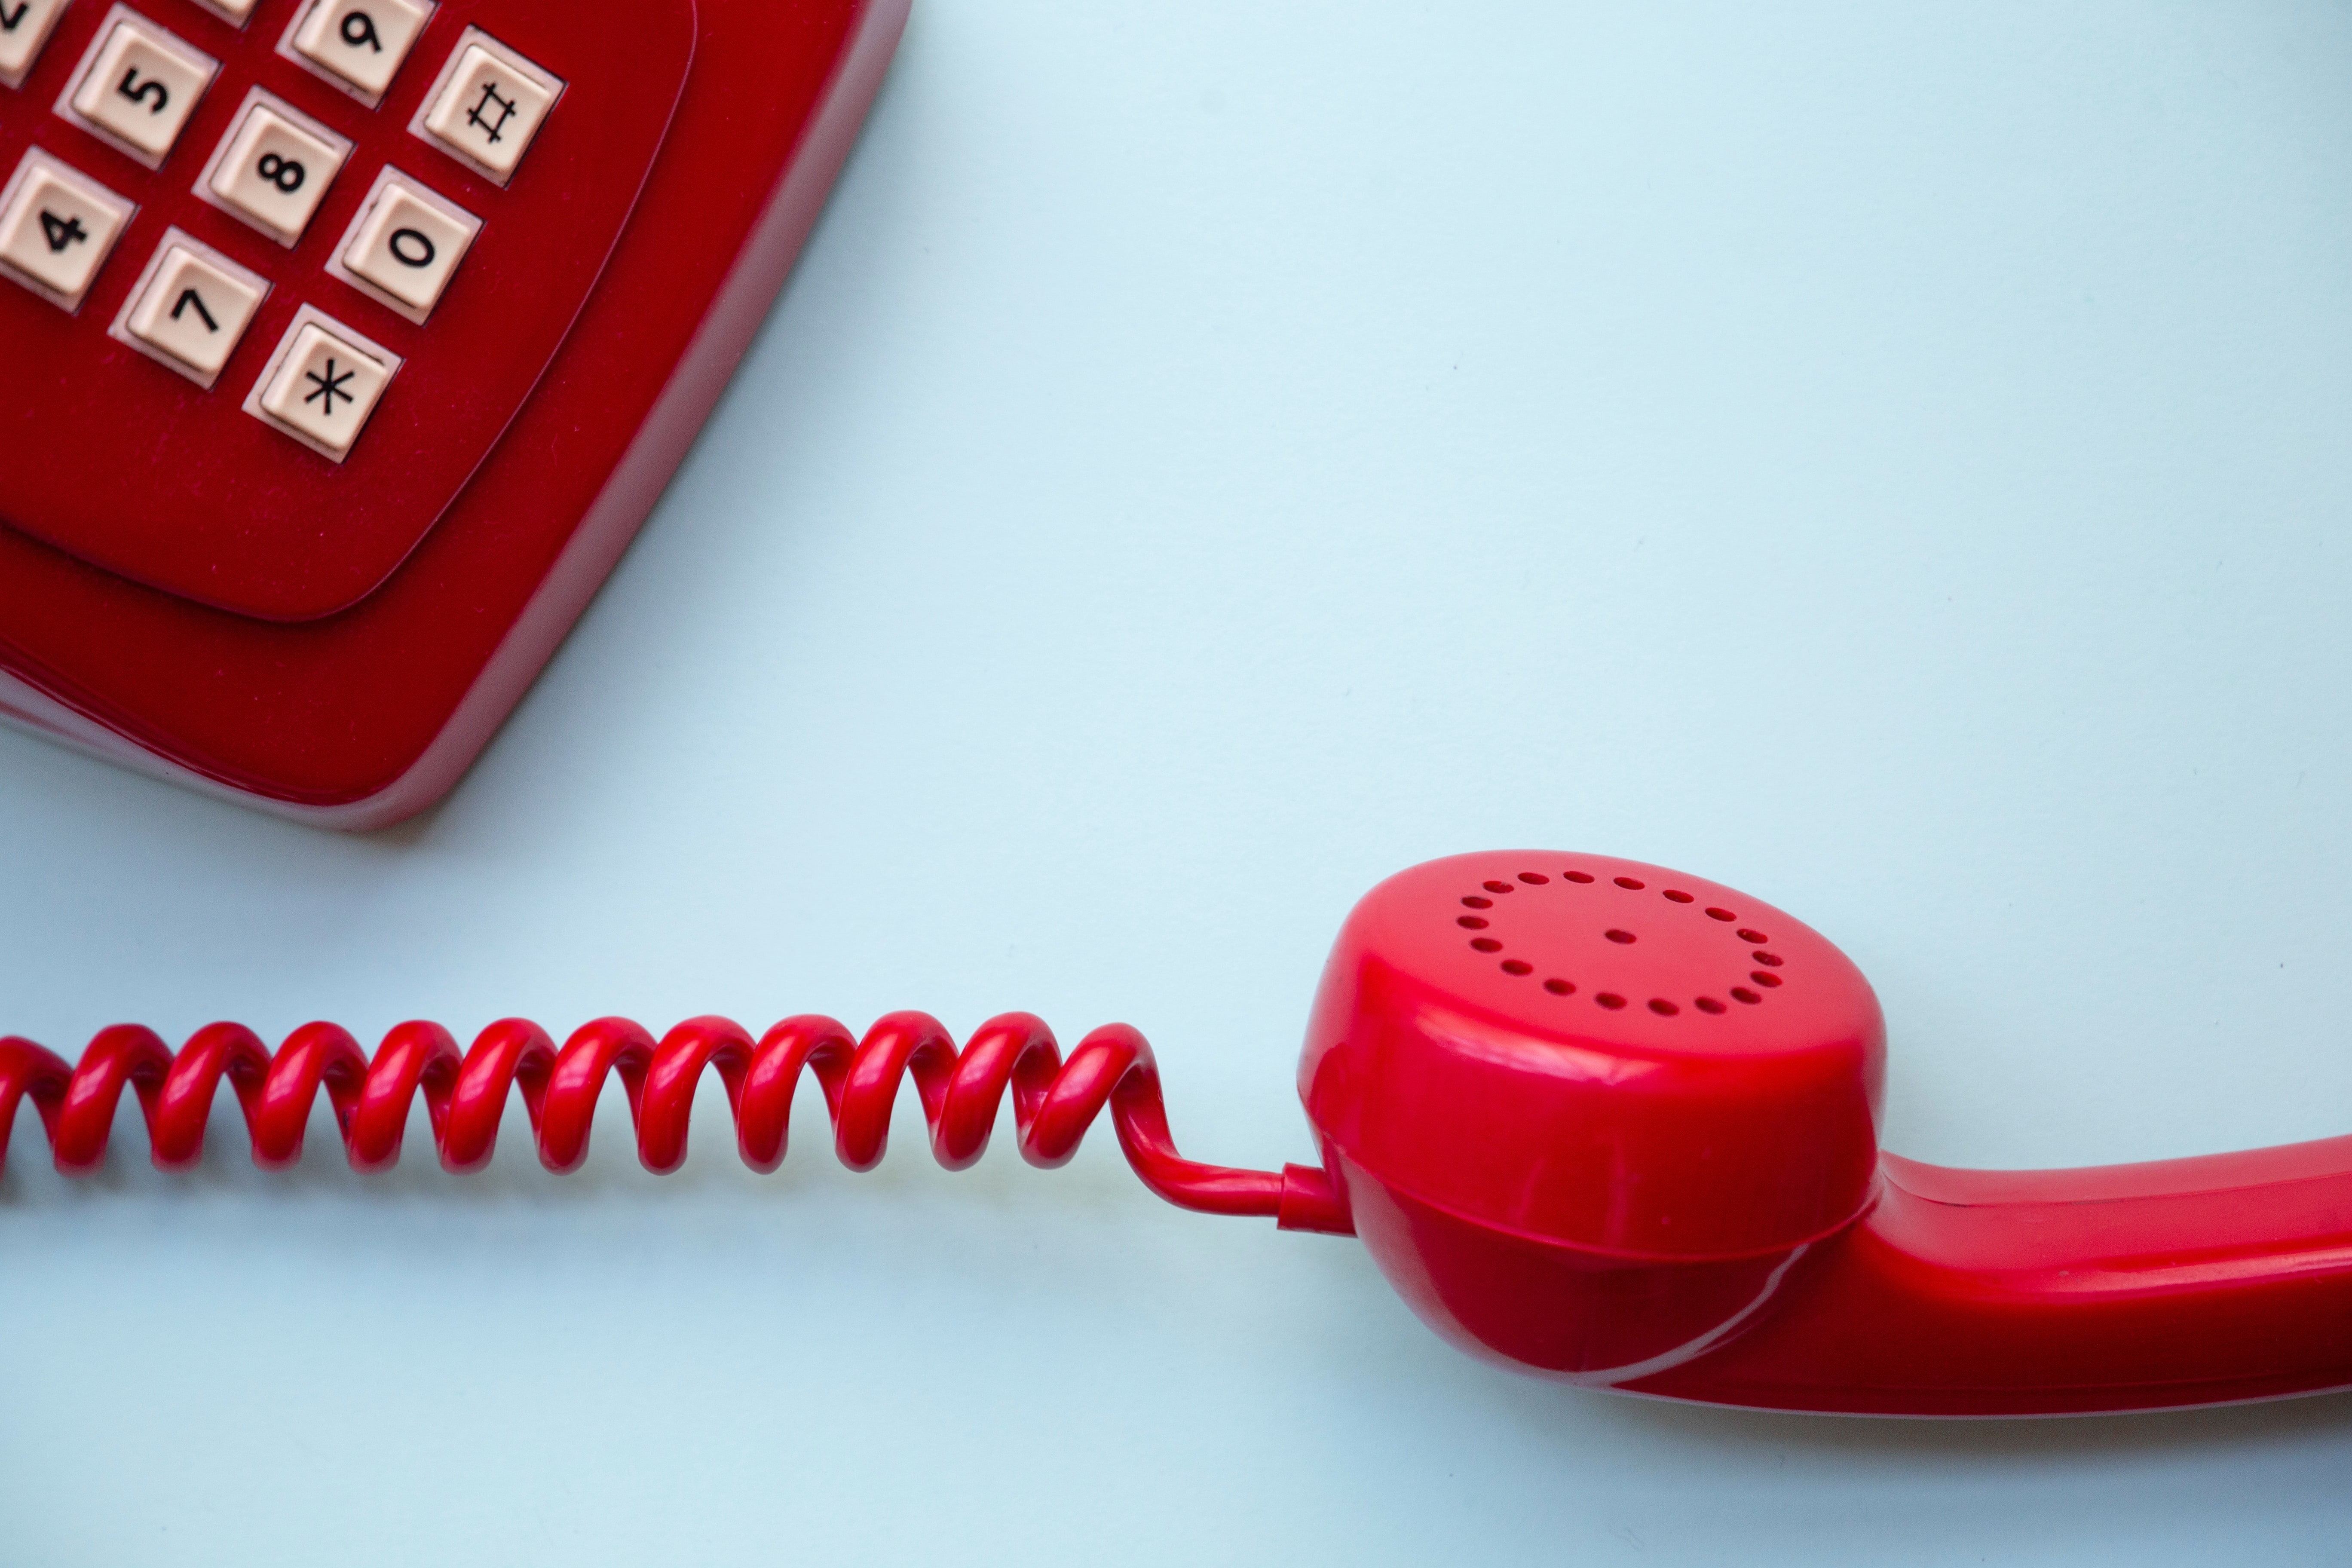 A red old-fashioned telephone